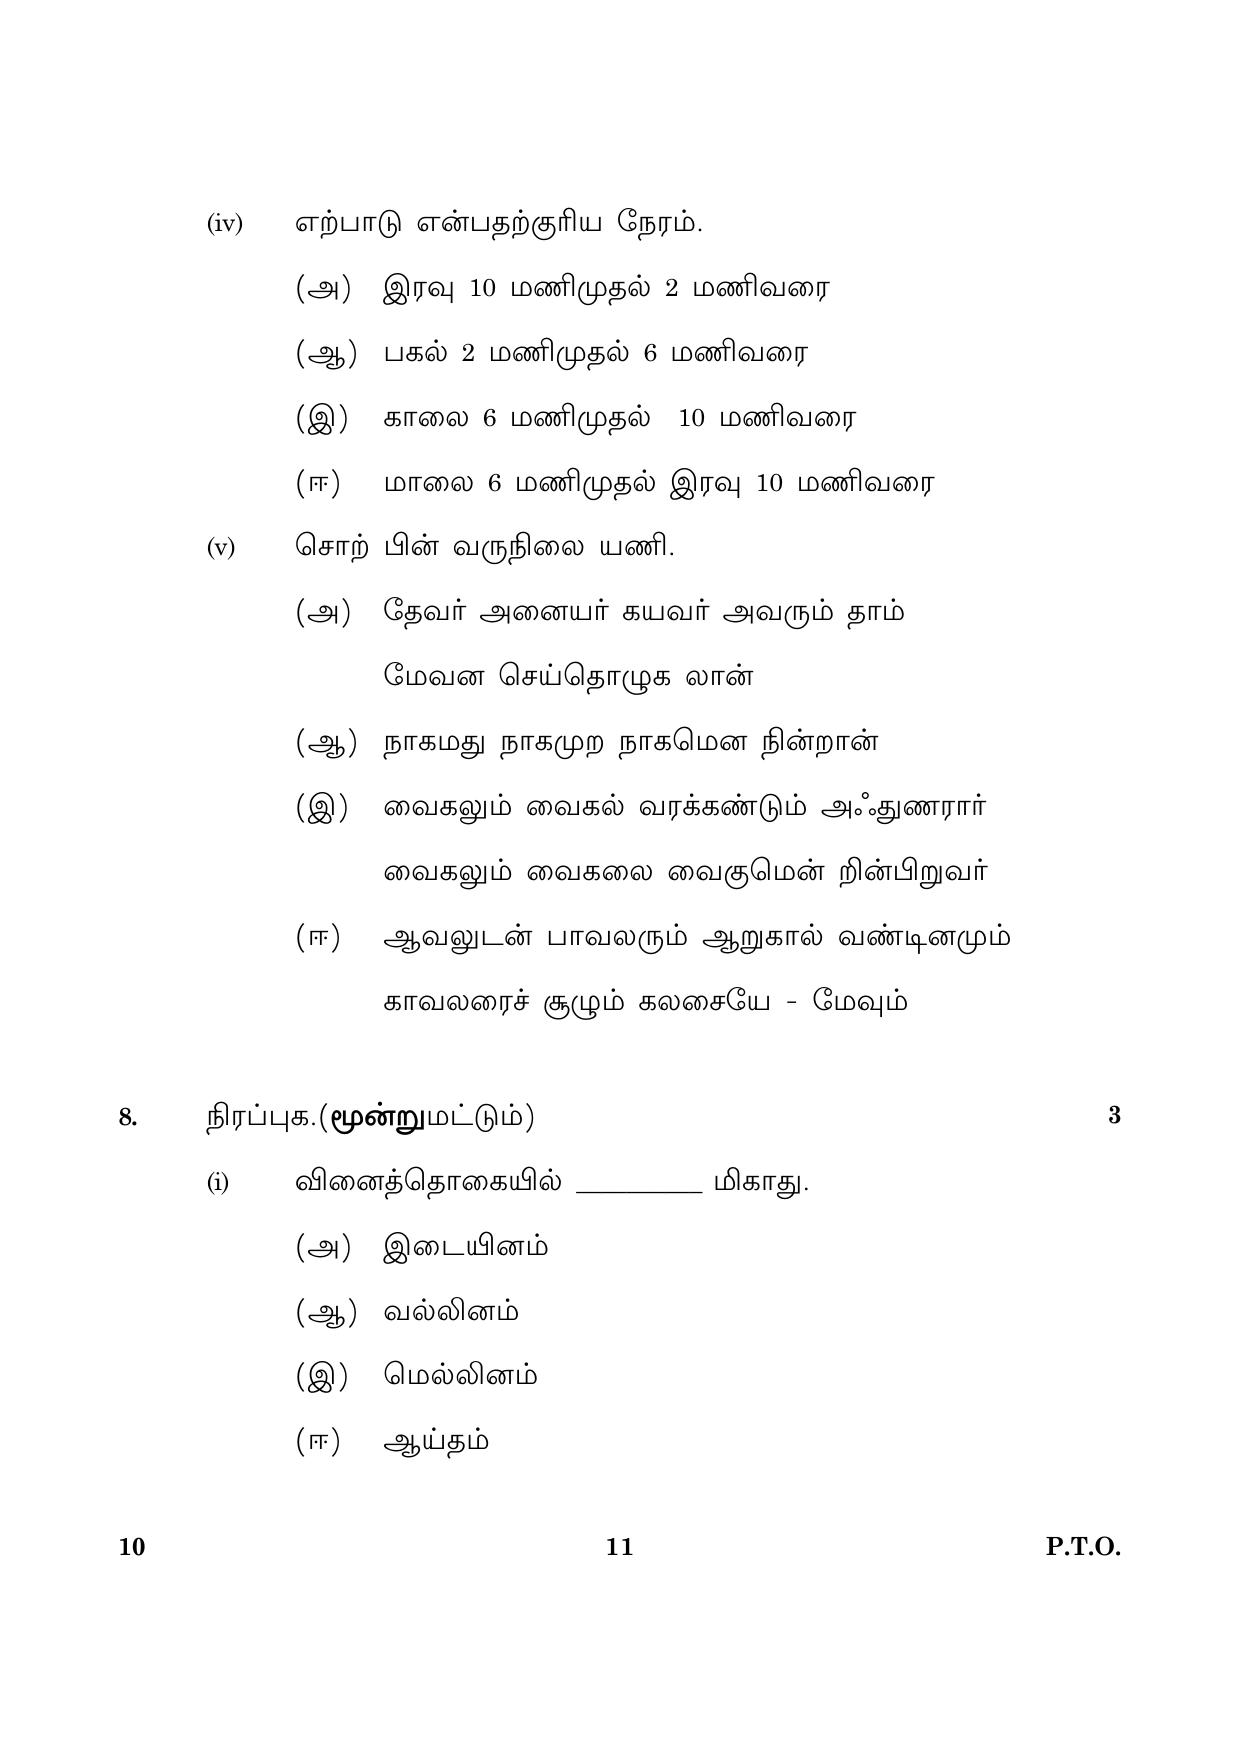 CBSE Class 10 010 Tamil 2016 Question Paper - Page 11